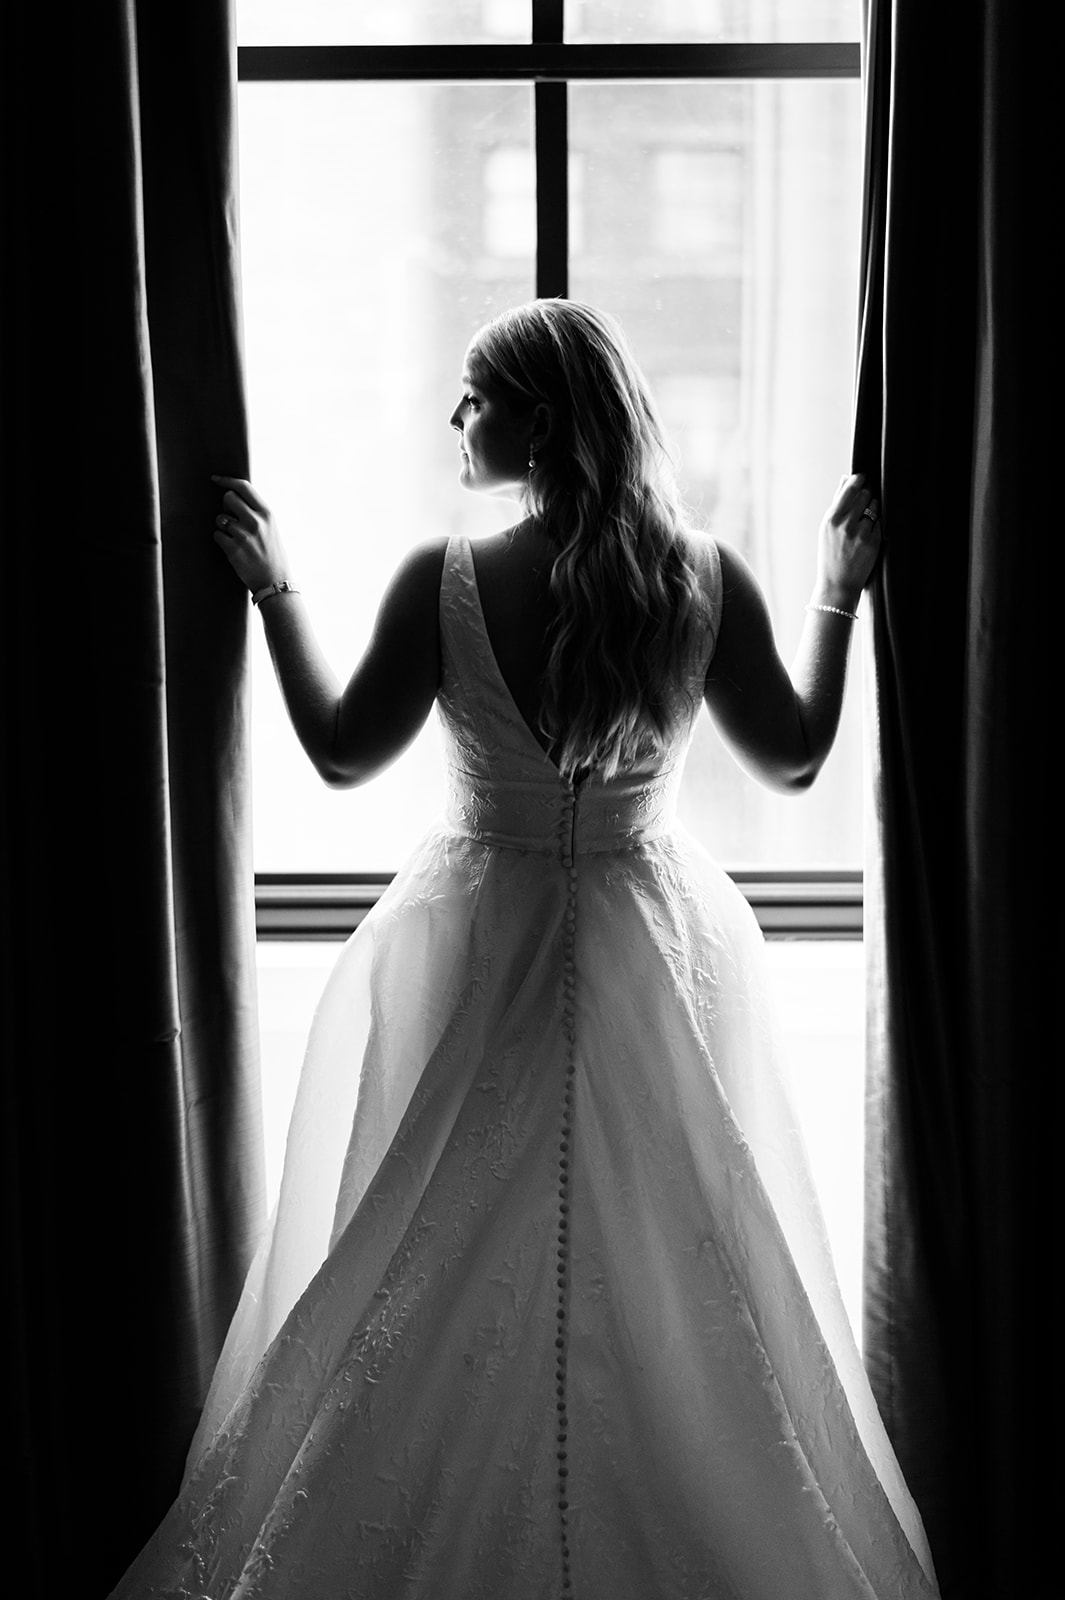 Blackstone Chicago Wedding Photography- bride by a window with curtains epic black and white photo